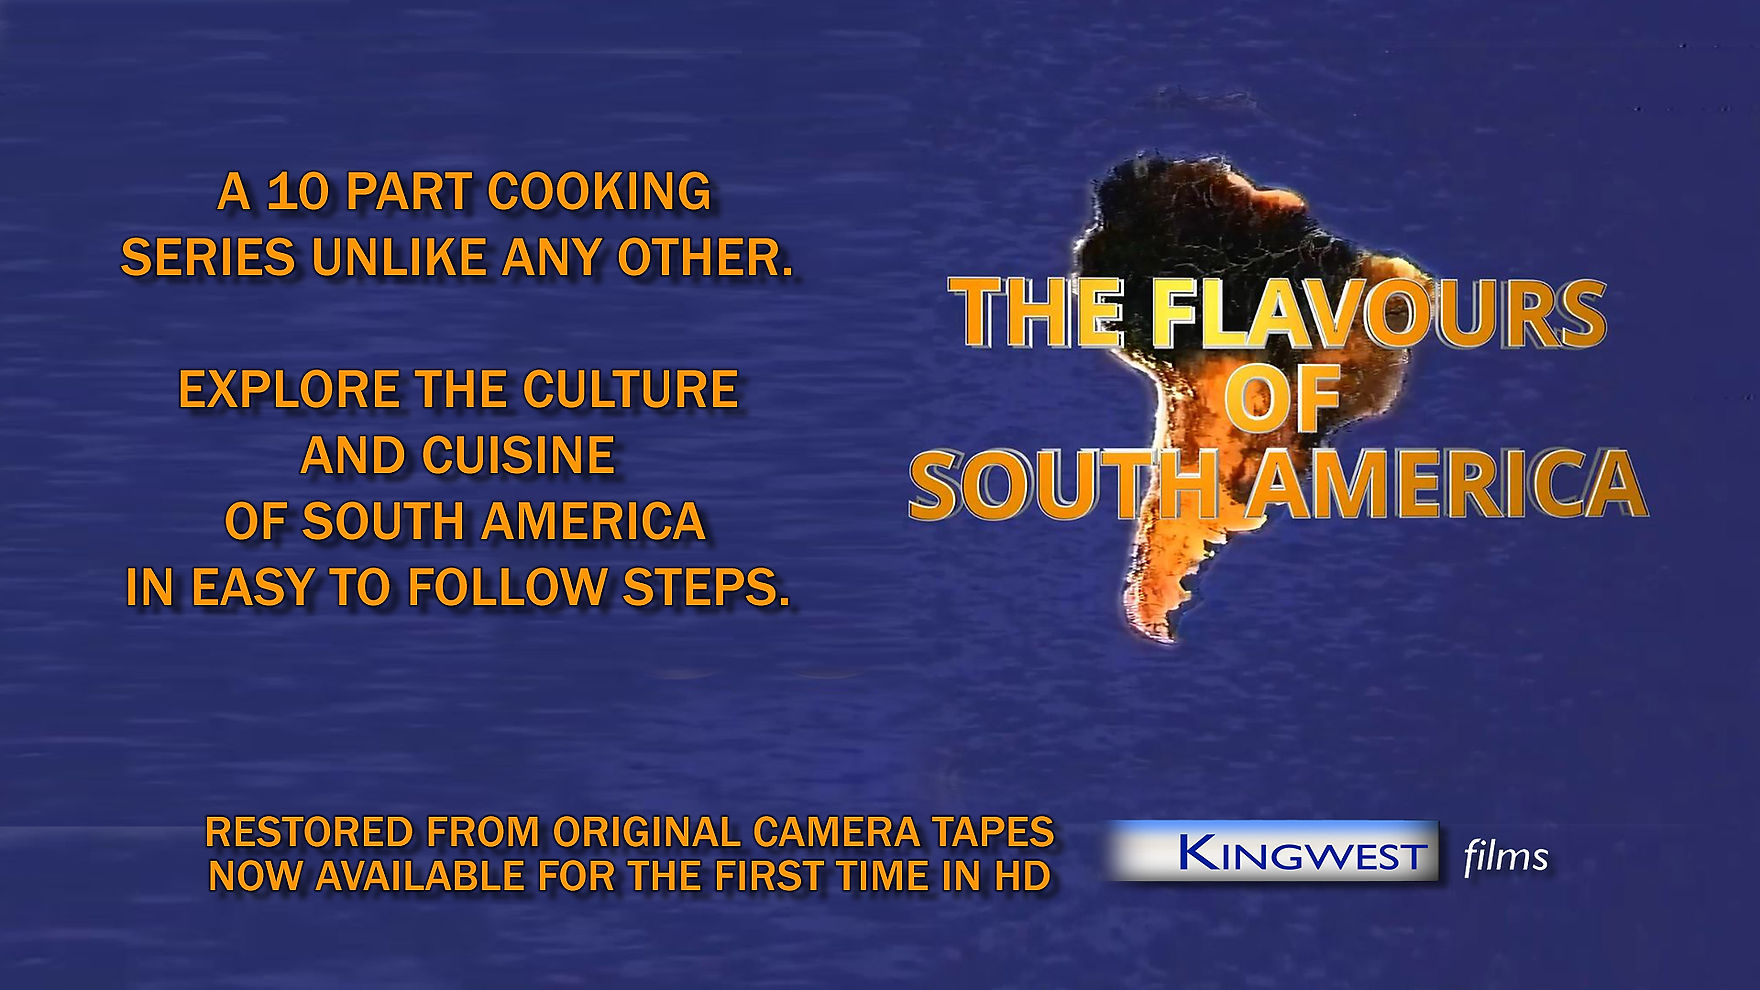 Flavours of South America